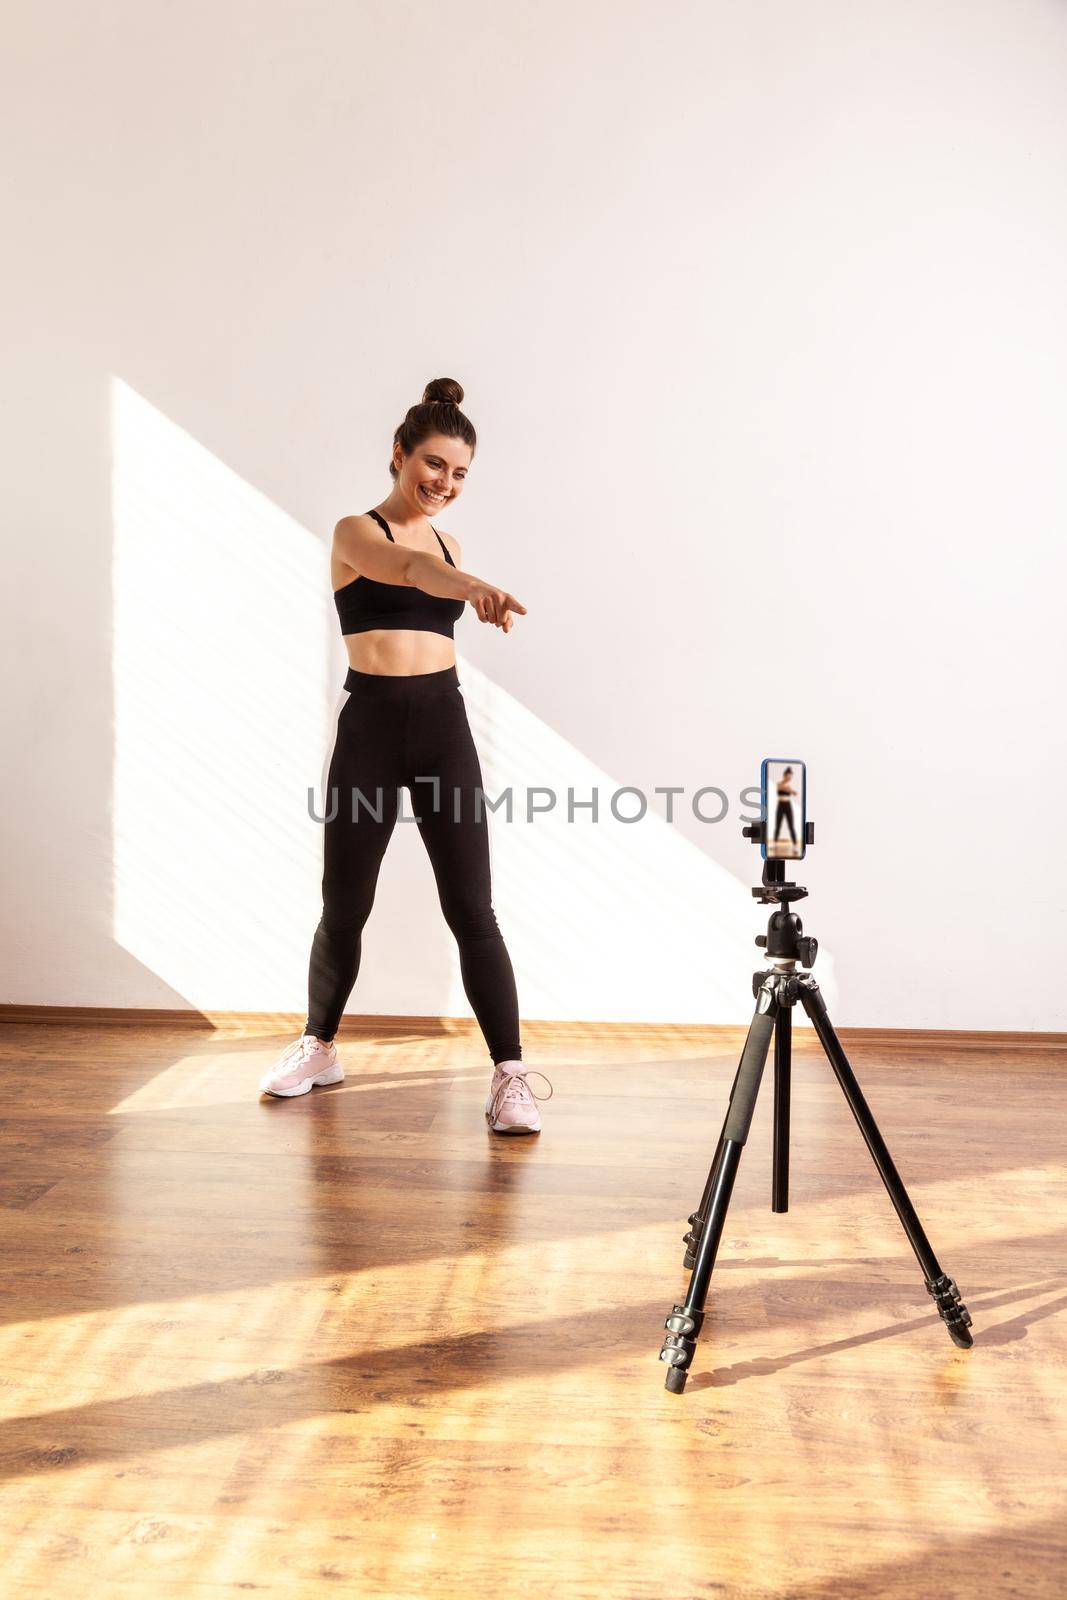 Coach conducting online sports training, pointing at phone camera on tripod, inviting you to workout by Khosro1